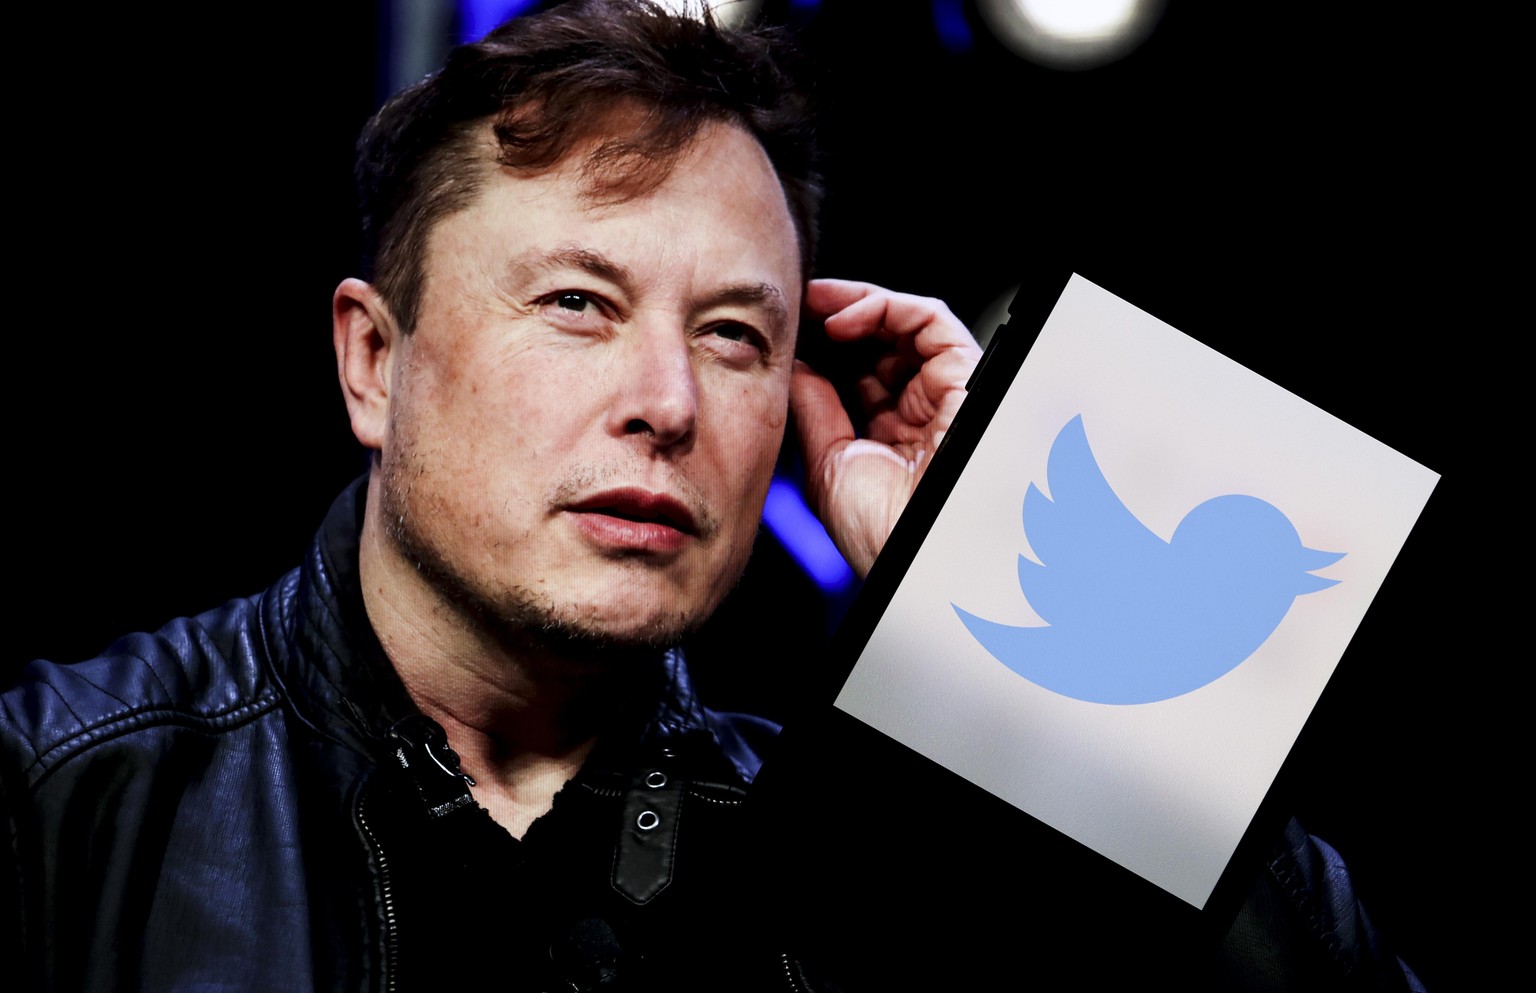 ANKARA, TURKIYE - APRIL 26: In this photo illustration, the image of Elon Musk is displayed on a computer screen and the logo of twitter on a mobile phone in Ankara, Turkiye on April 26, 2022. Twitter ...